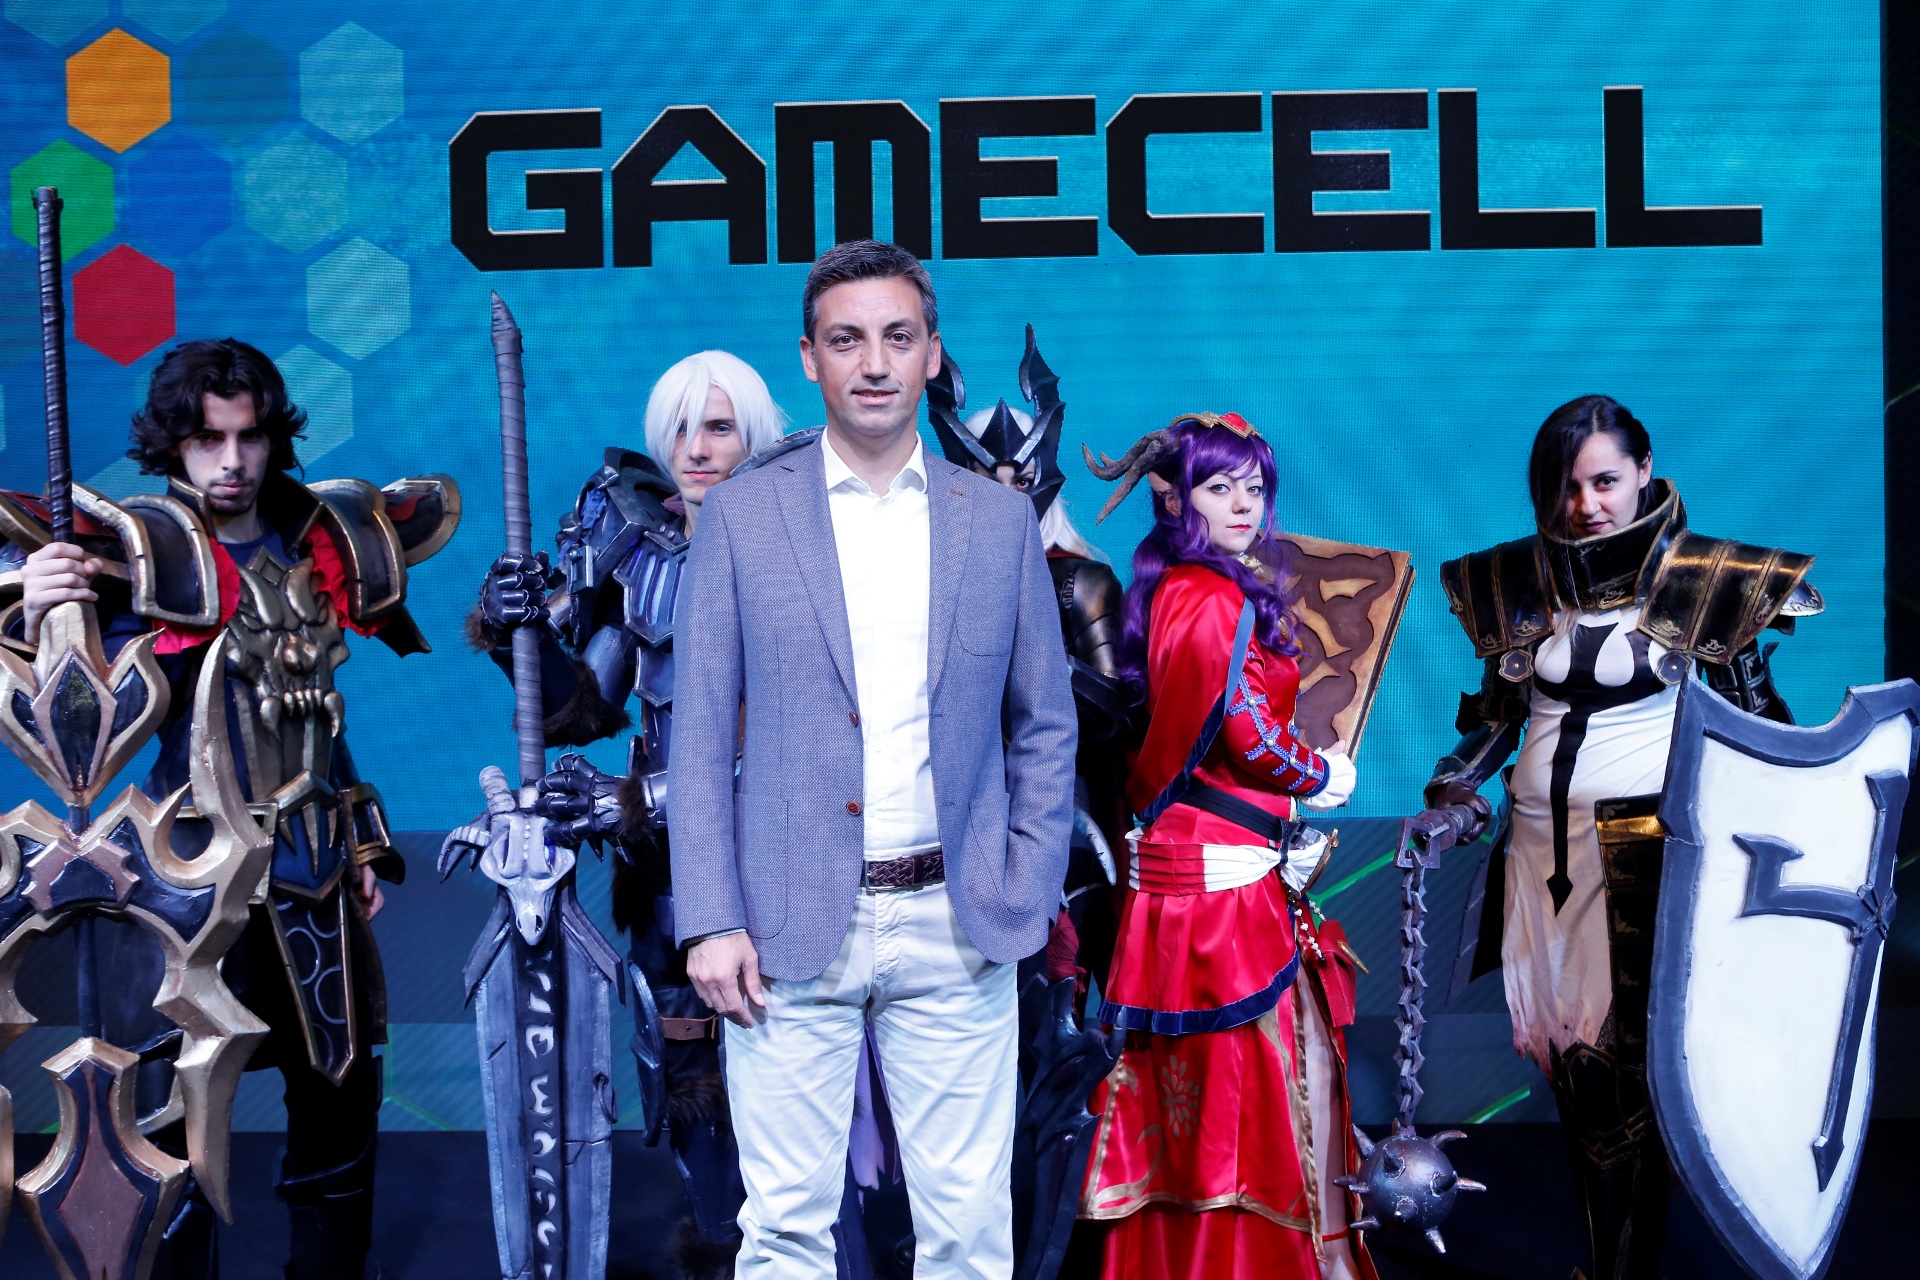 ismail-butun-1-turkcell-gamecell-cosplay